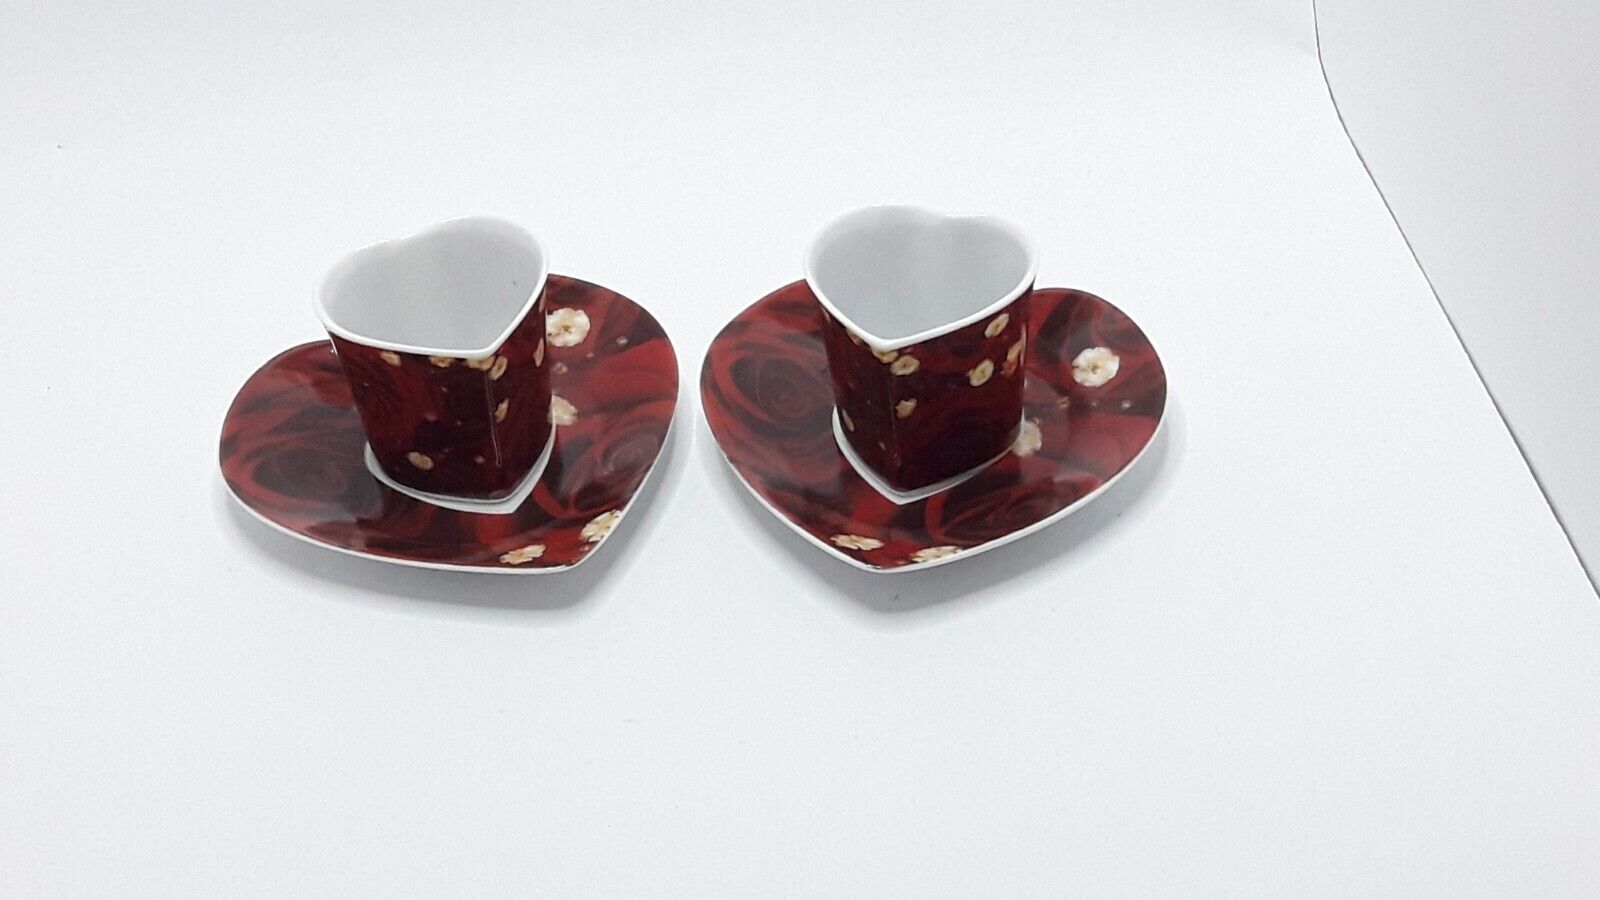 Beautiful Heart Shaped Porcelain Coffee Cups and Saucers Red Rose Flowers